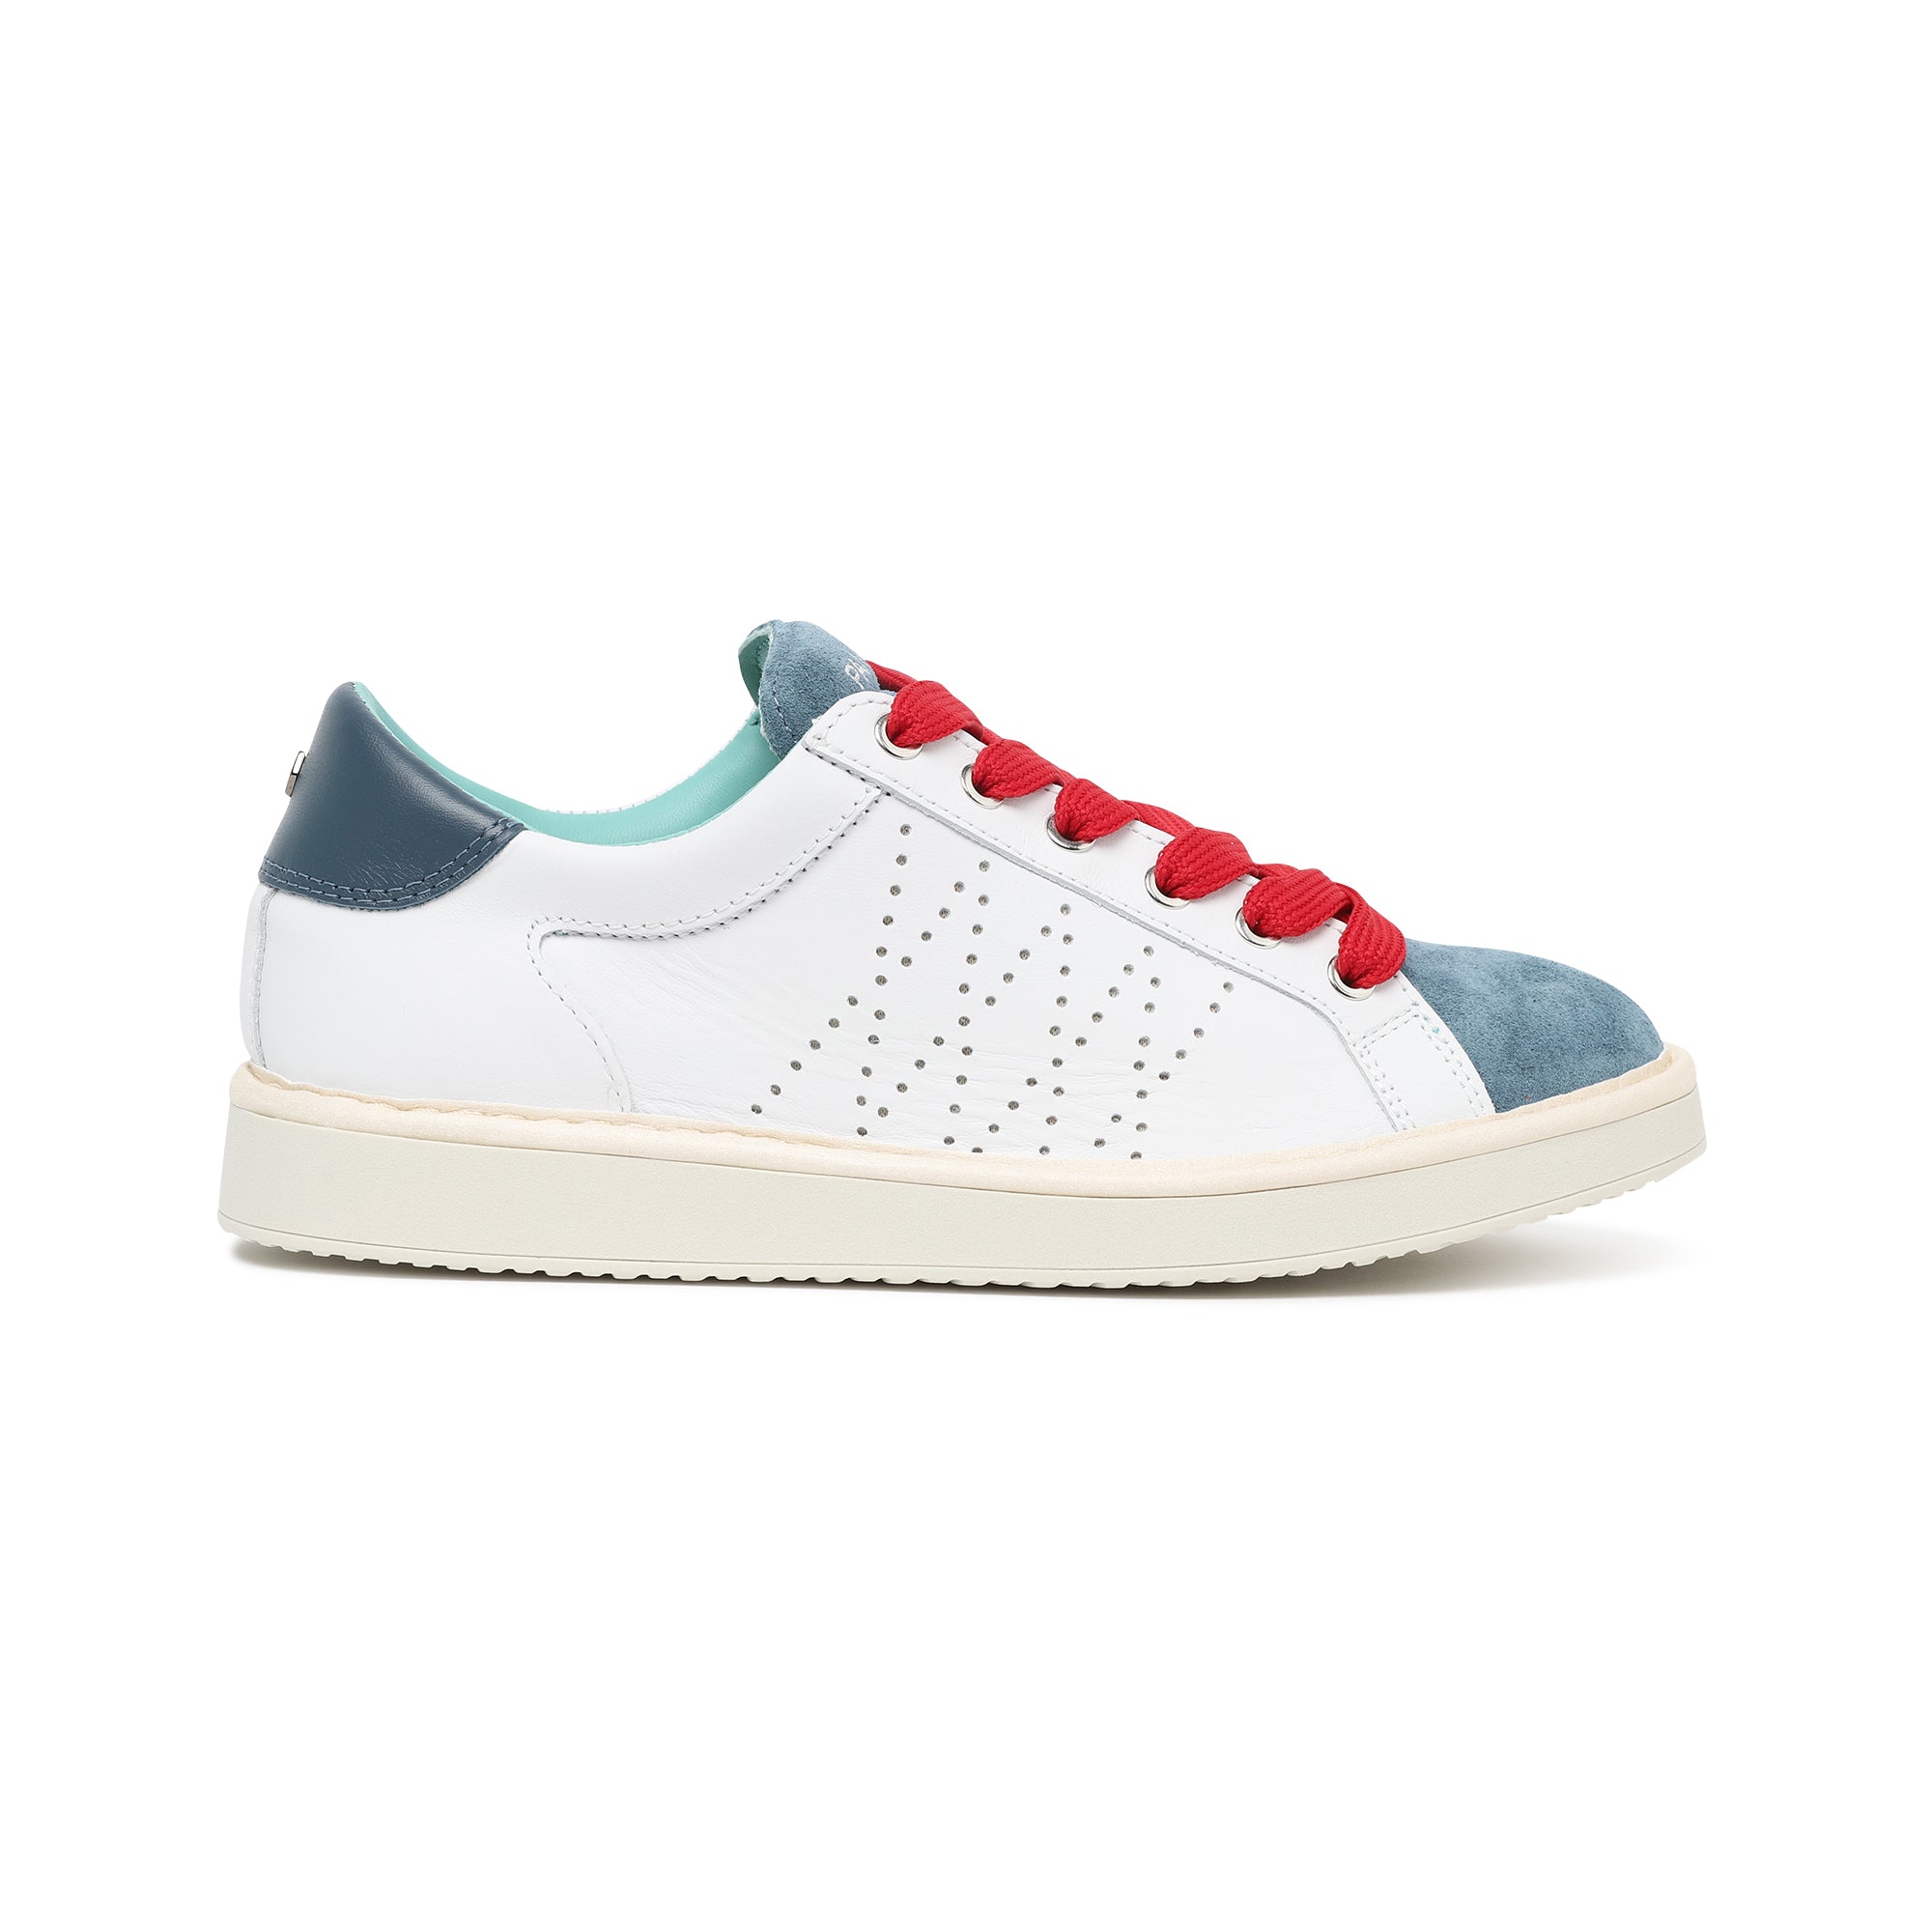 scarpe PANCHIC LACE-UP LEATHER SUEDEBASIC BLUE-RED